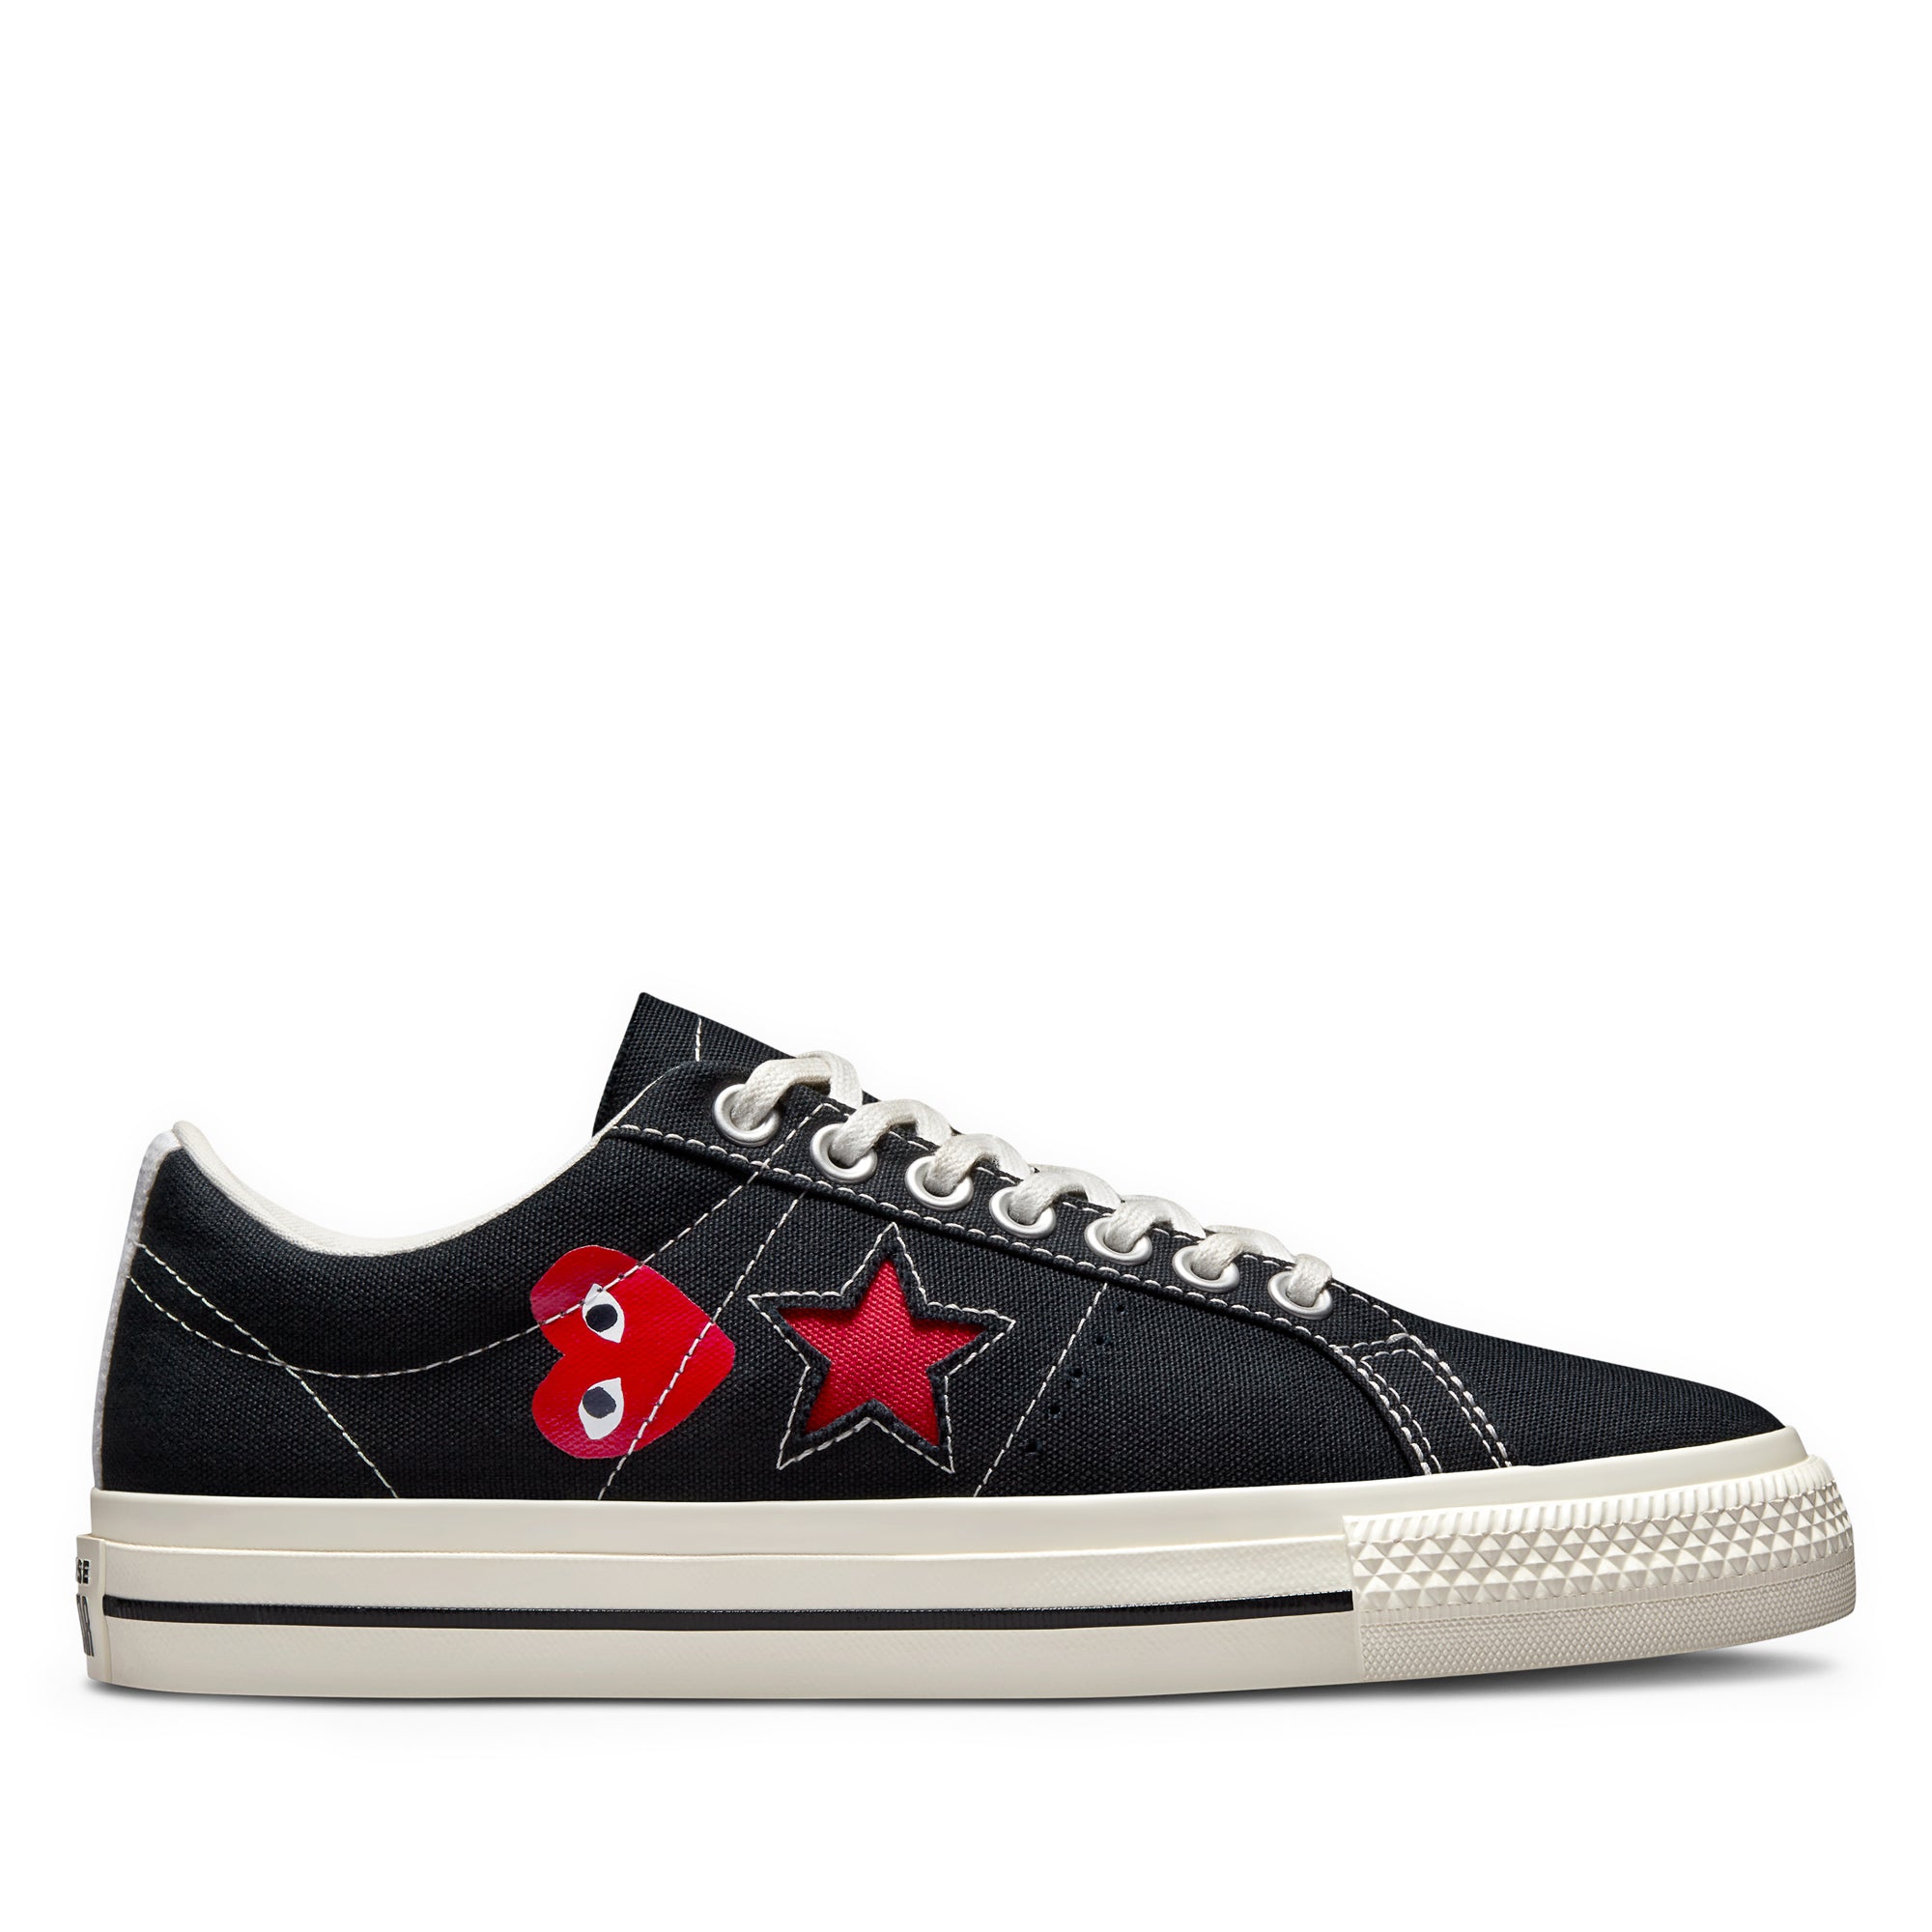 Play - Red Heart One Star - (Black) DSMNY